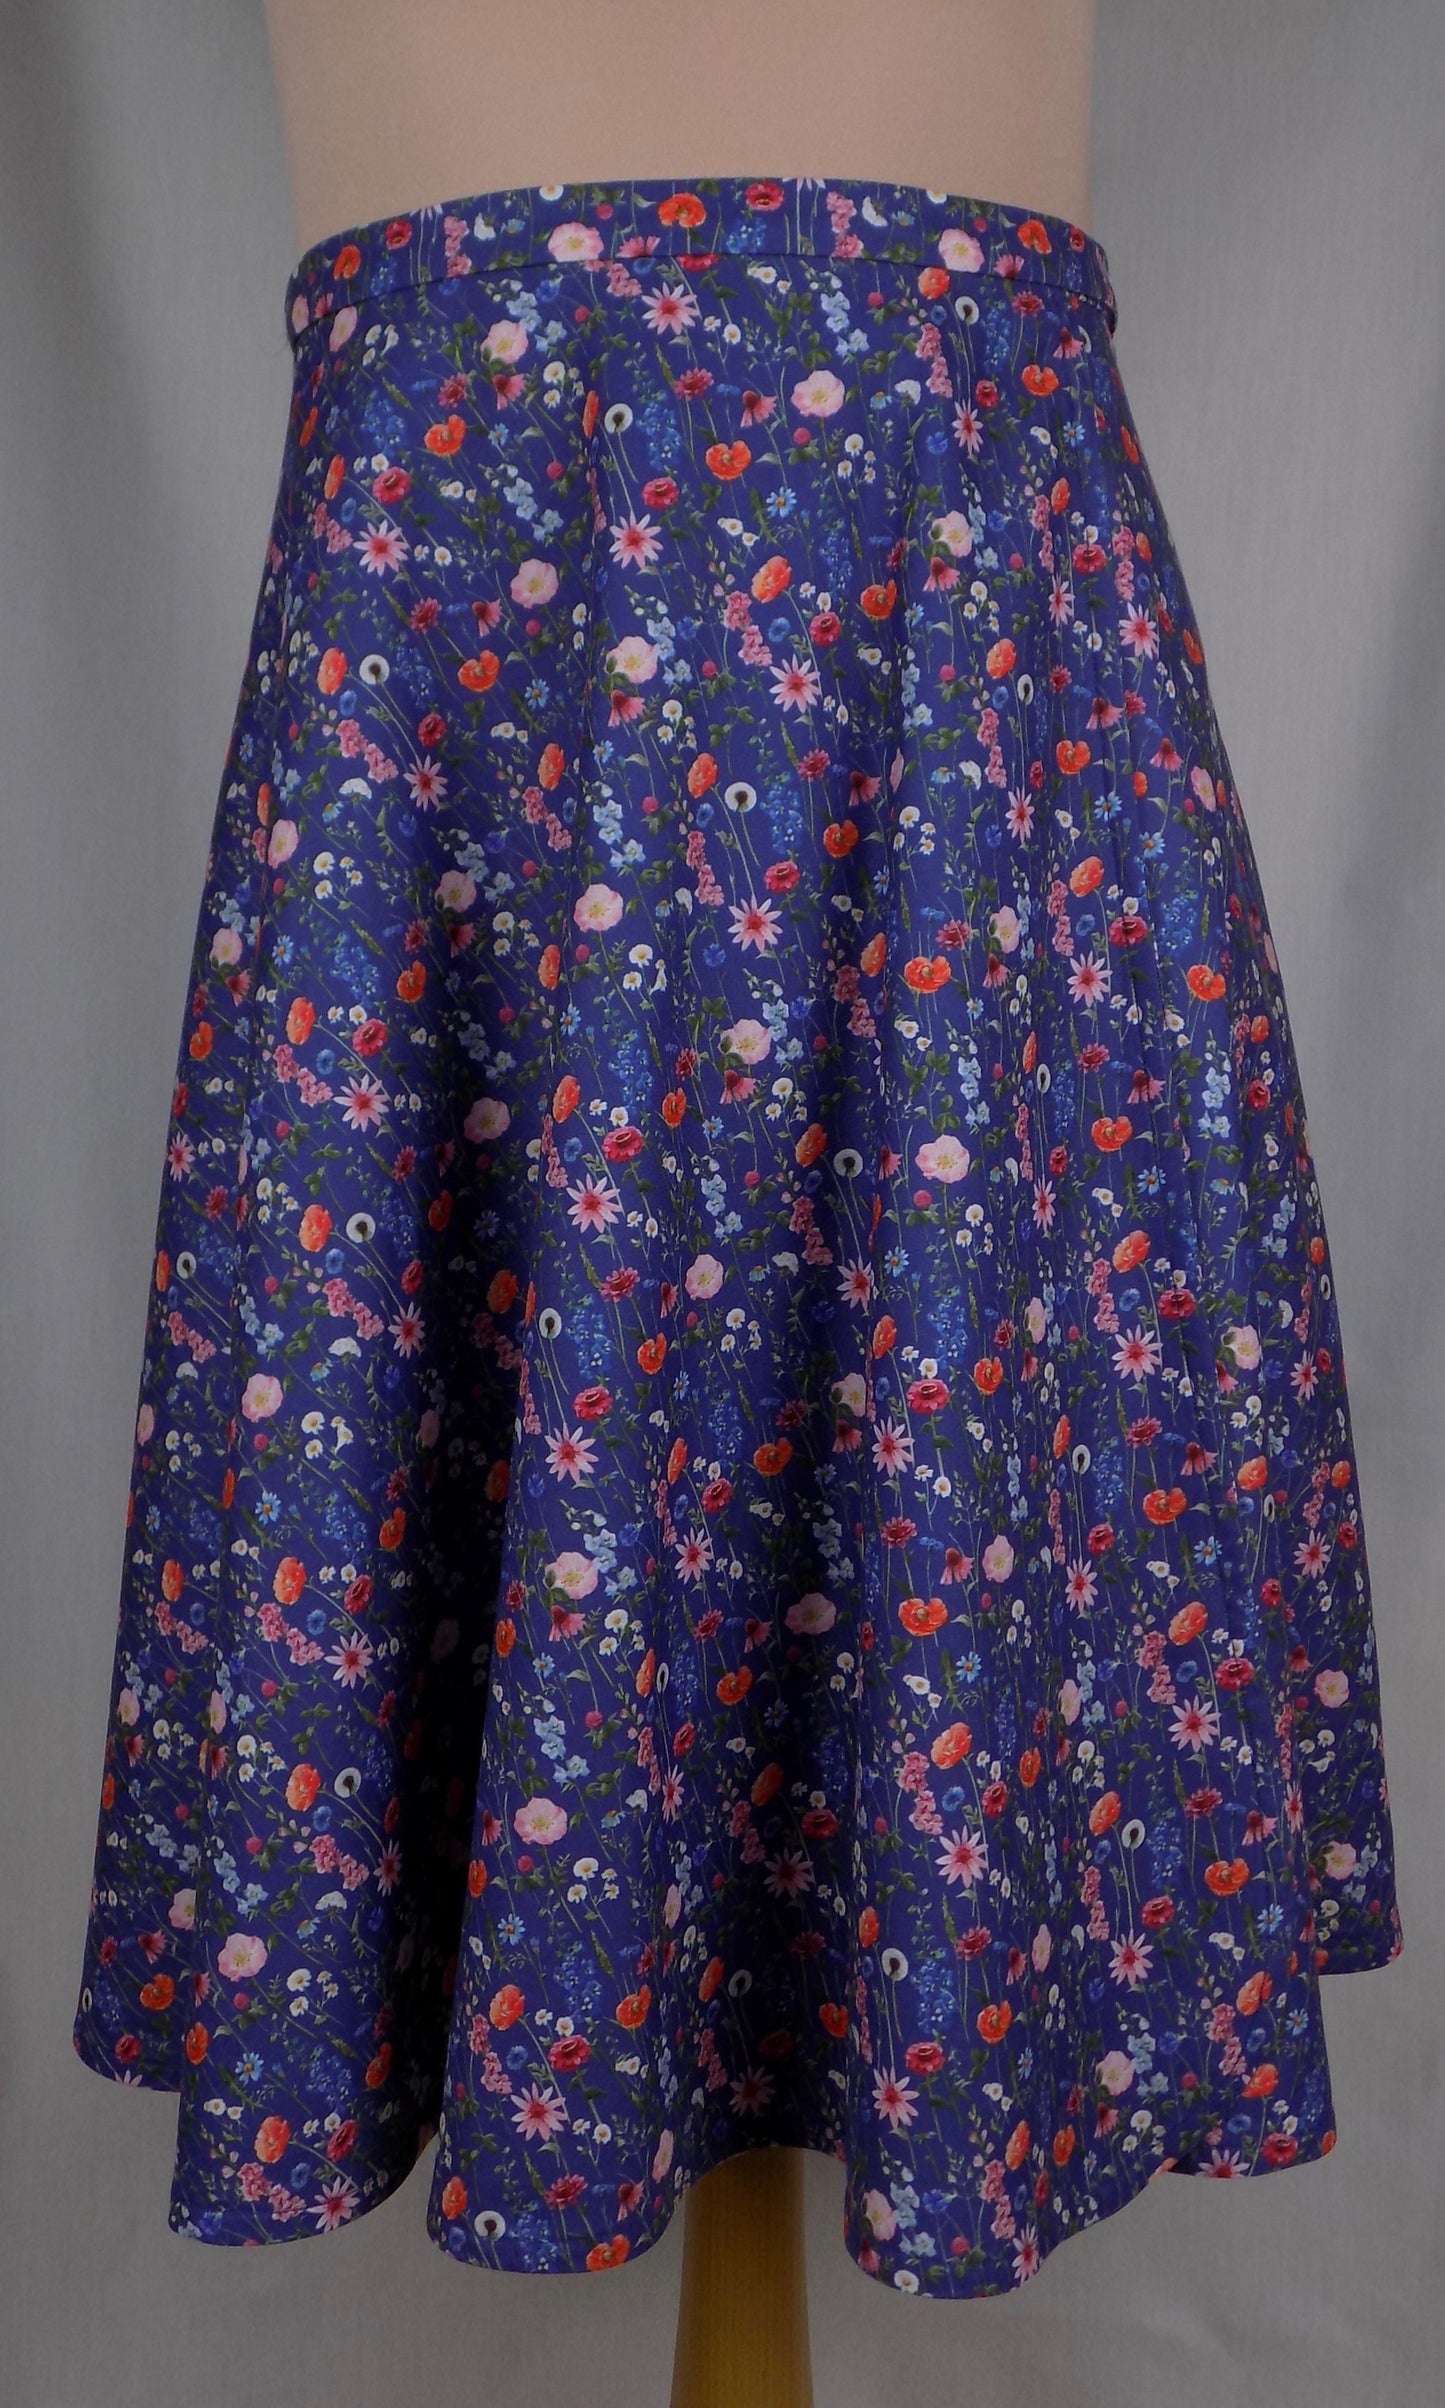 Cotton wrap skirt - Meadow on navy